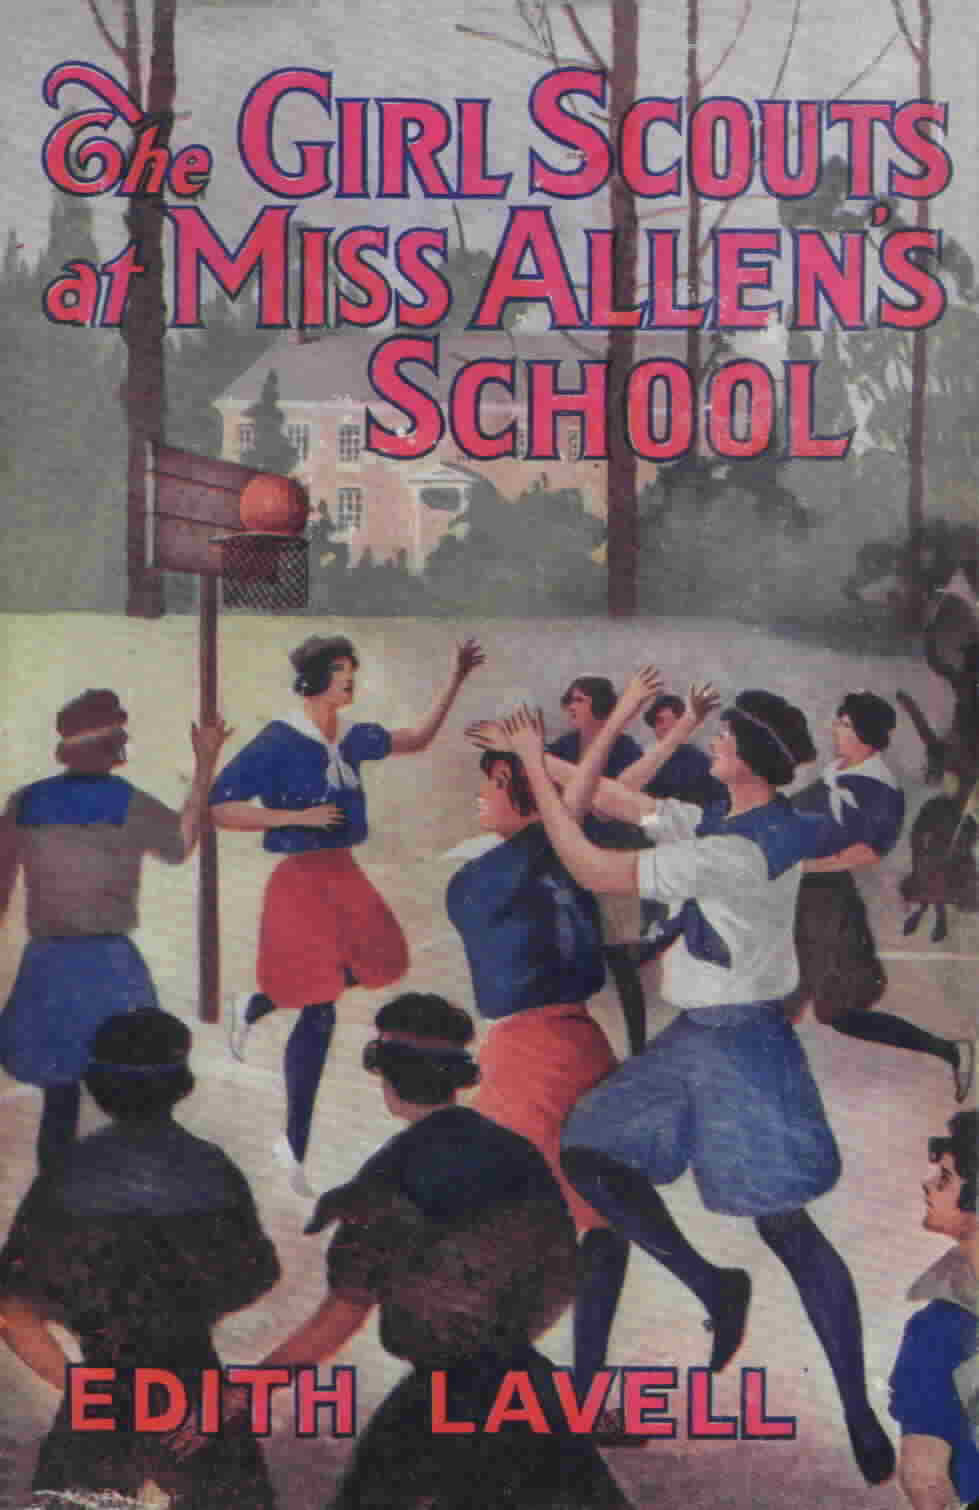 The Girl Scouts at Miss Allen's School